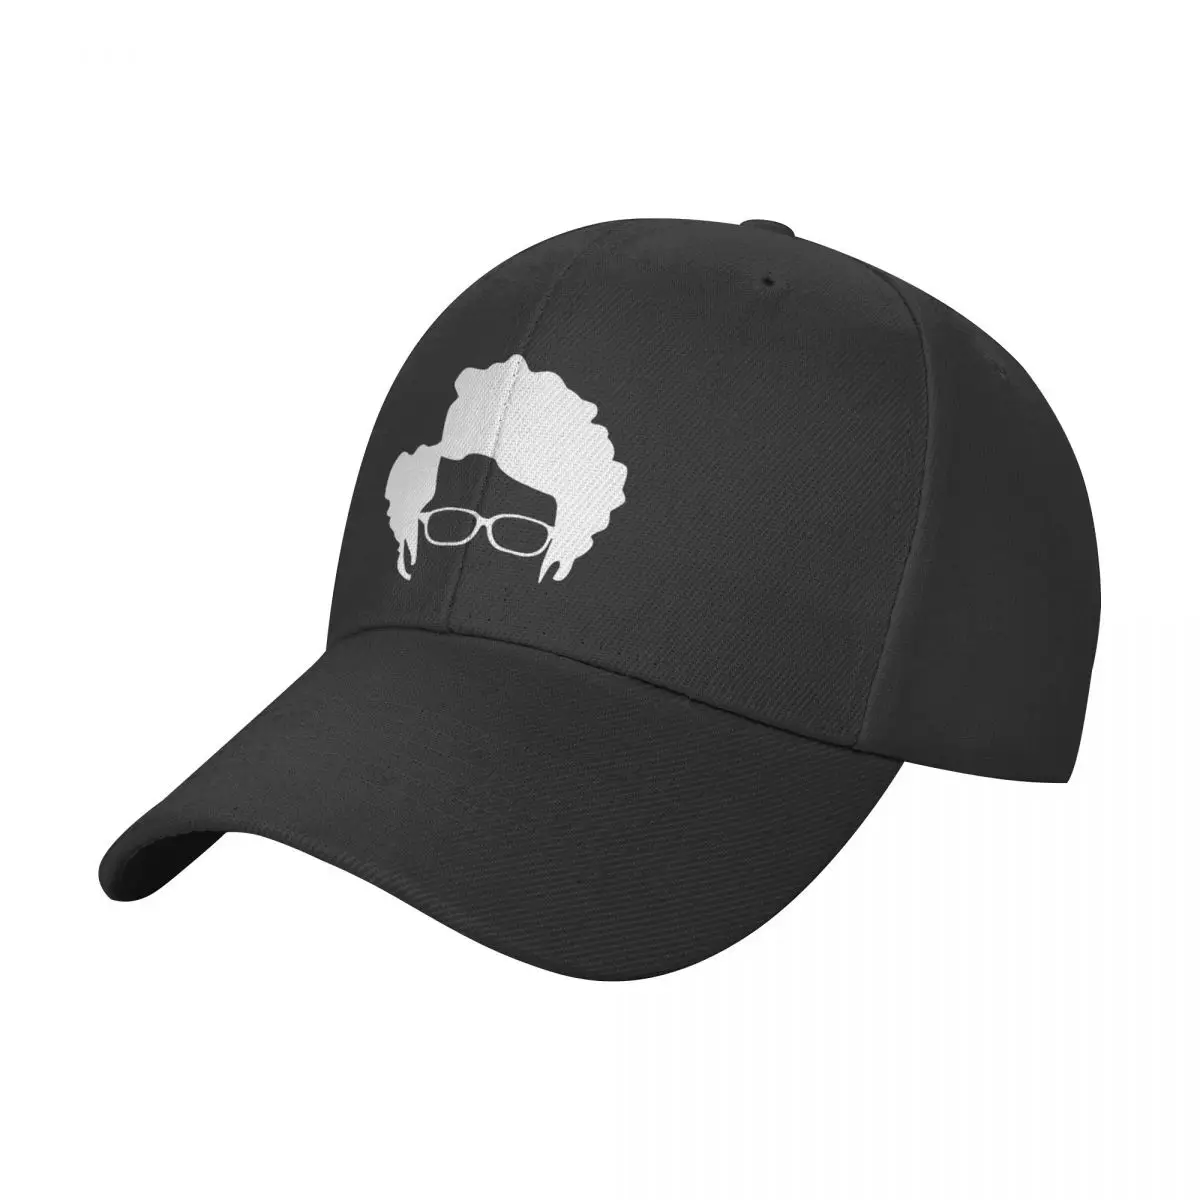 

Maurice Moss Casual Baseball Cap for Women and Men Fashion Hat Hard Top Caps Snapback Hat Unisex